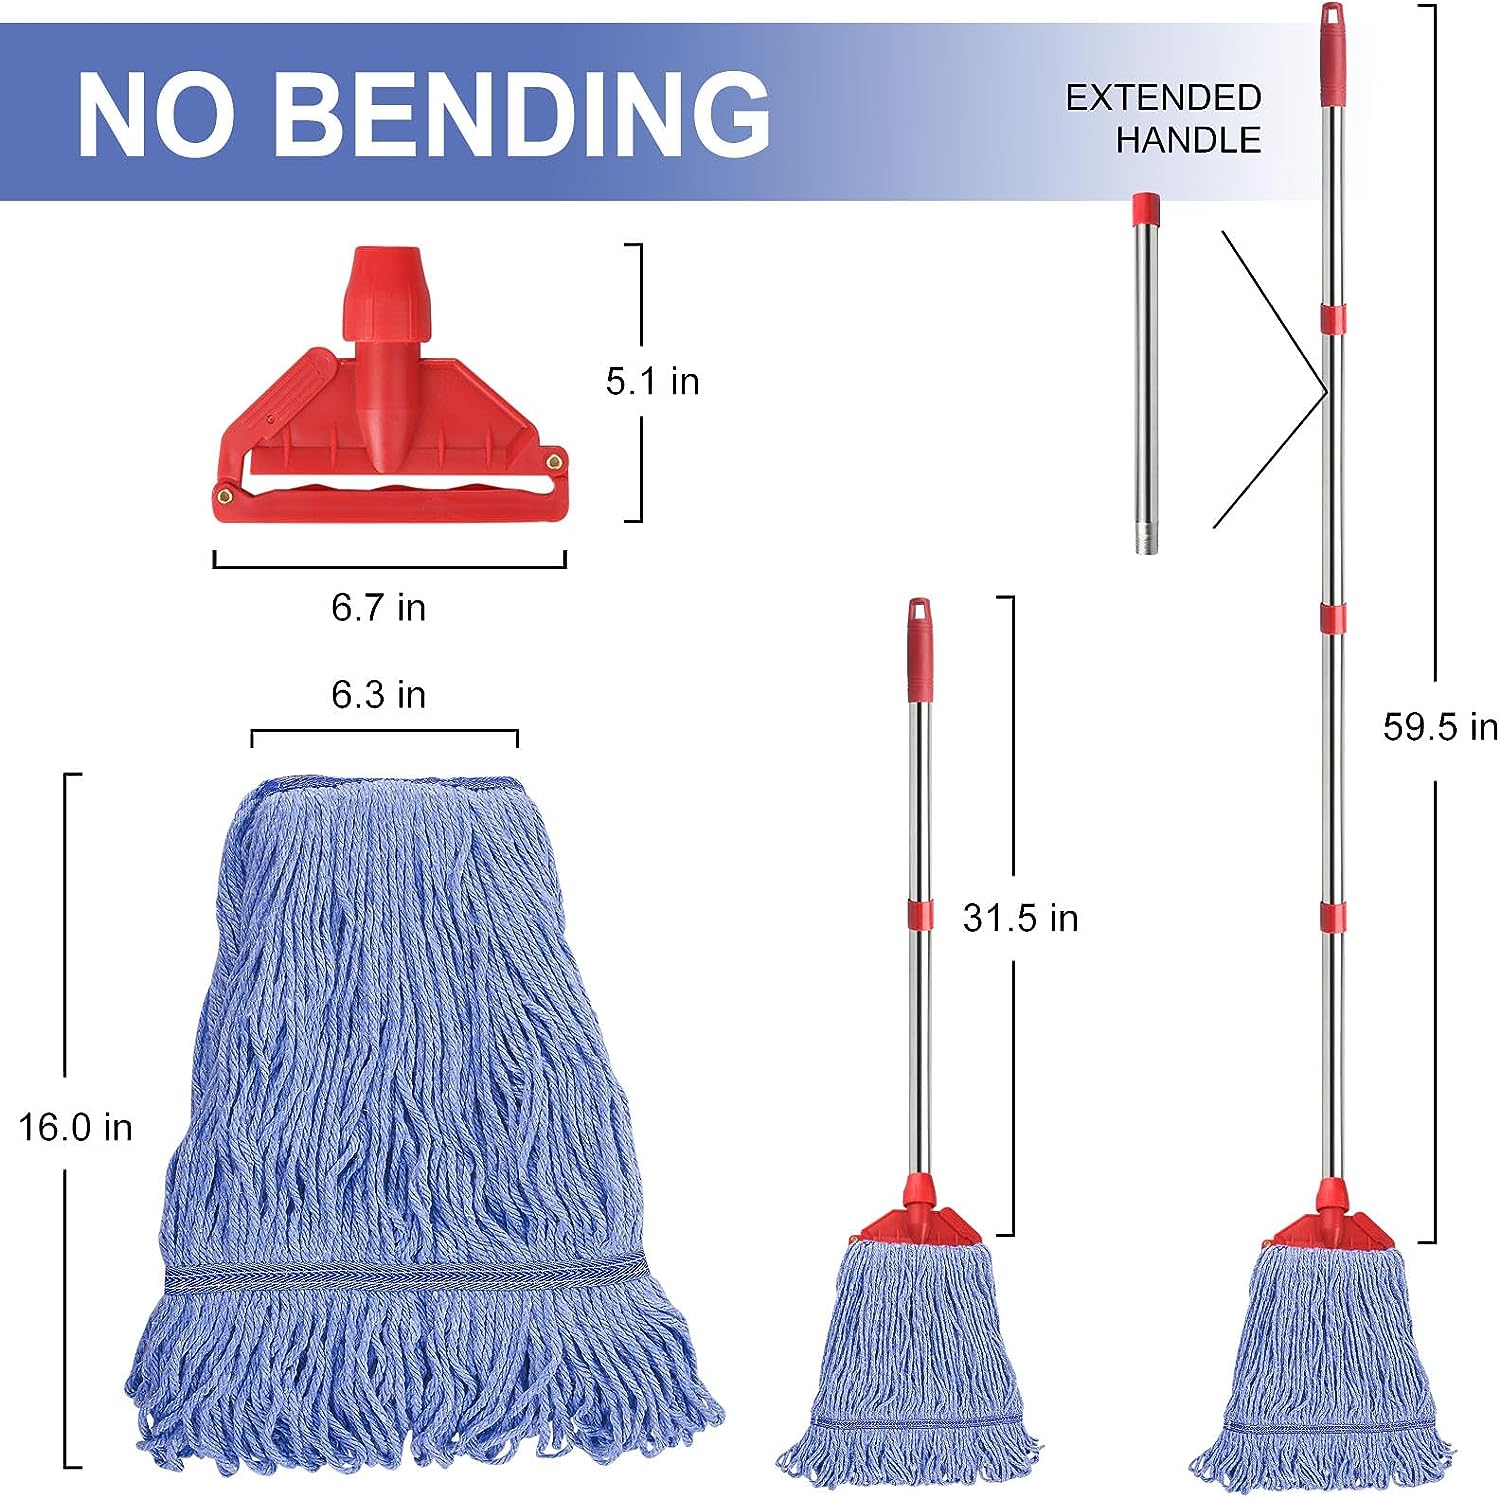 VENETIO ClassicCotton String Mop with 60" Mop Handle, Heavy Duty Industrial Cotton Mops for Floor Cleaning, Commercial Looped-End String Wet Mop for Home, Kitchen, Garage, Office, Workshop, Warehouse Concrete/Tile Floor ➡ CS-00032